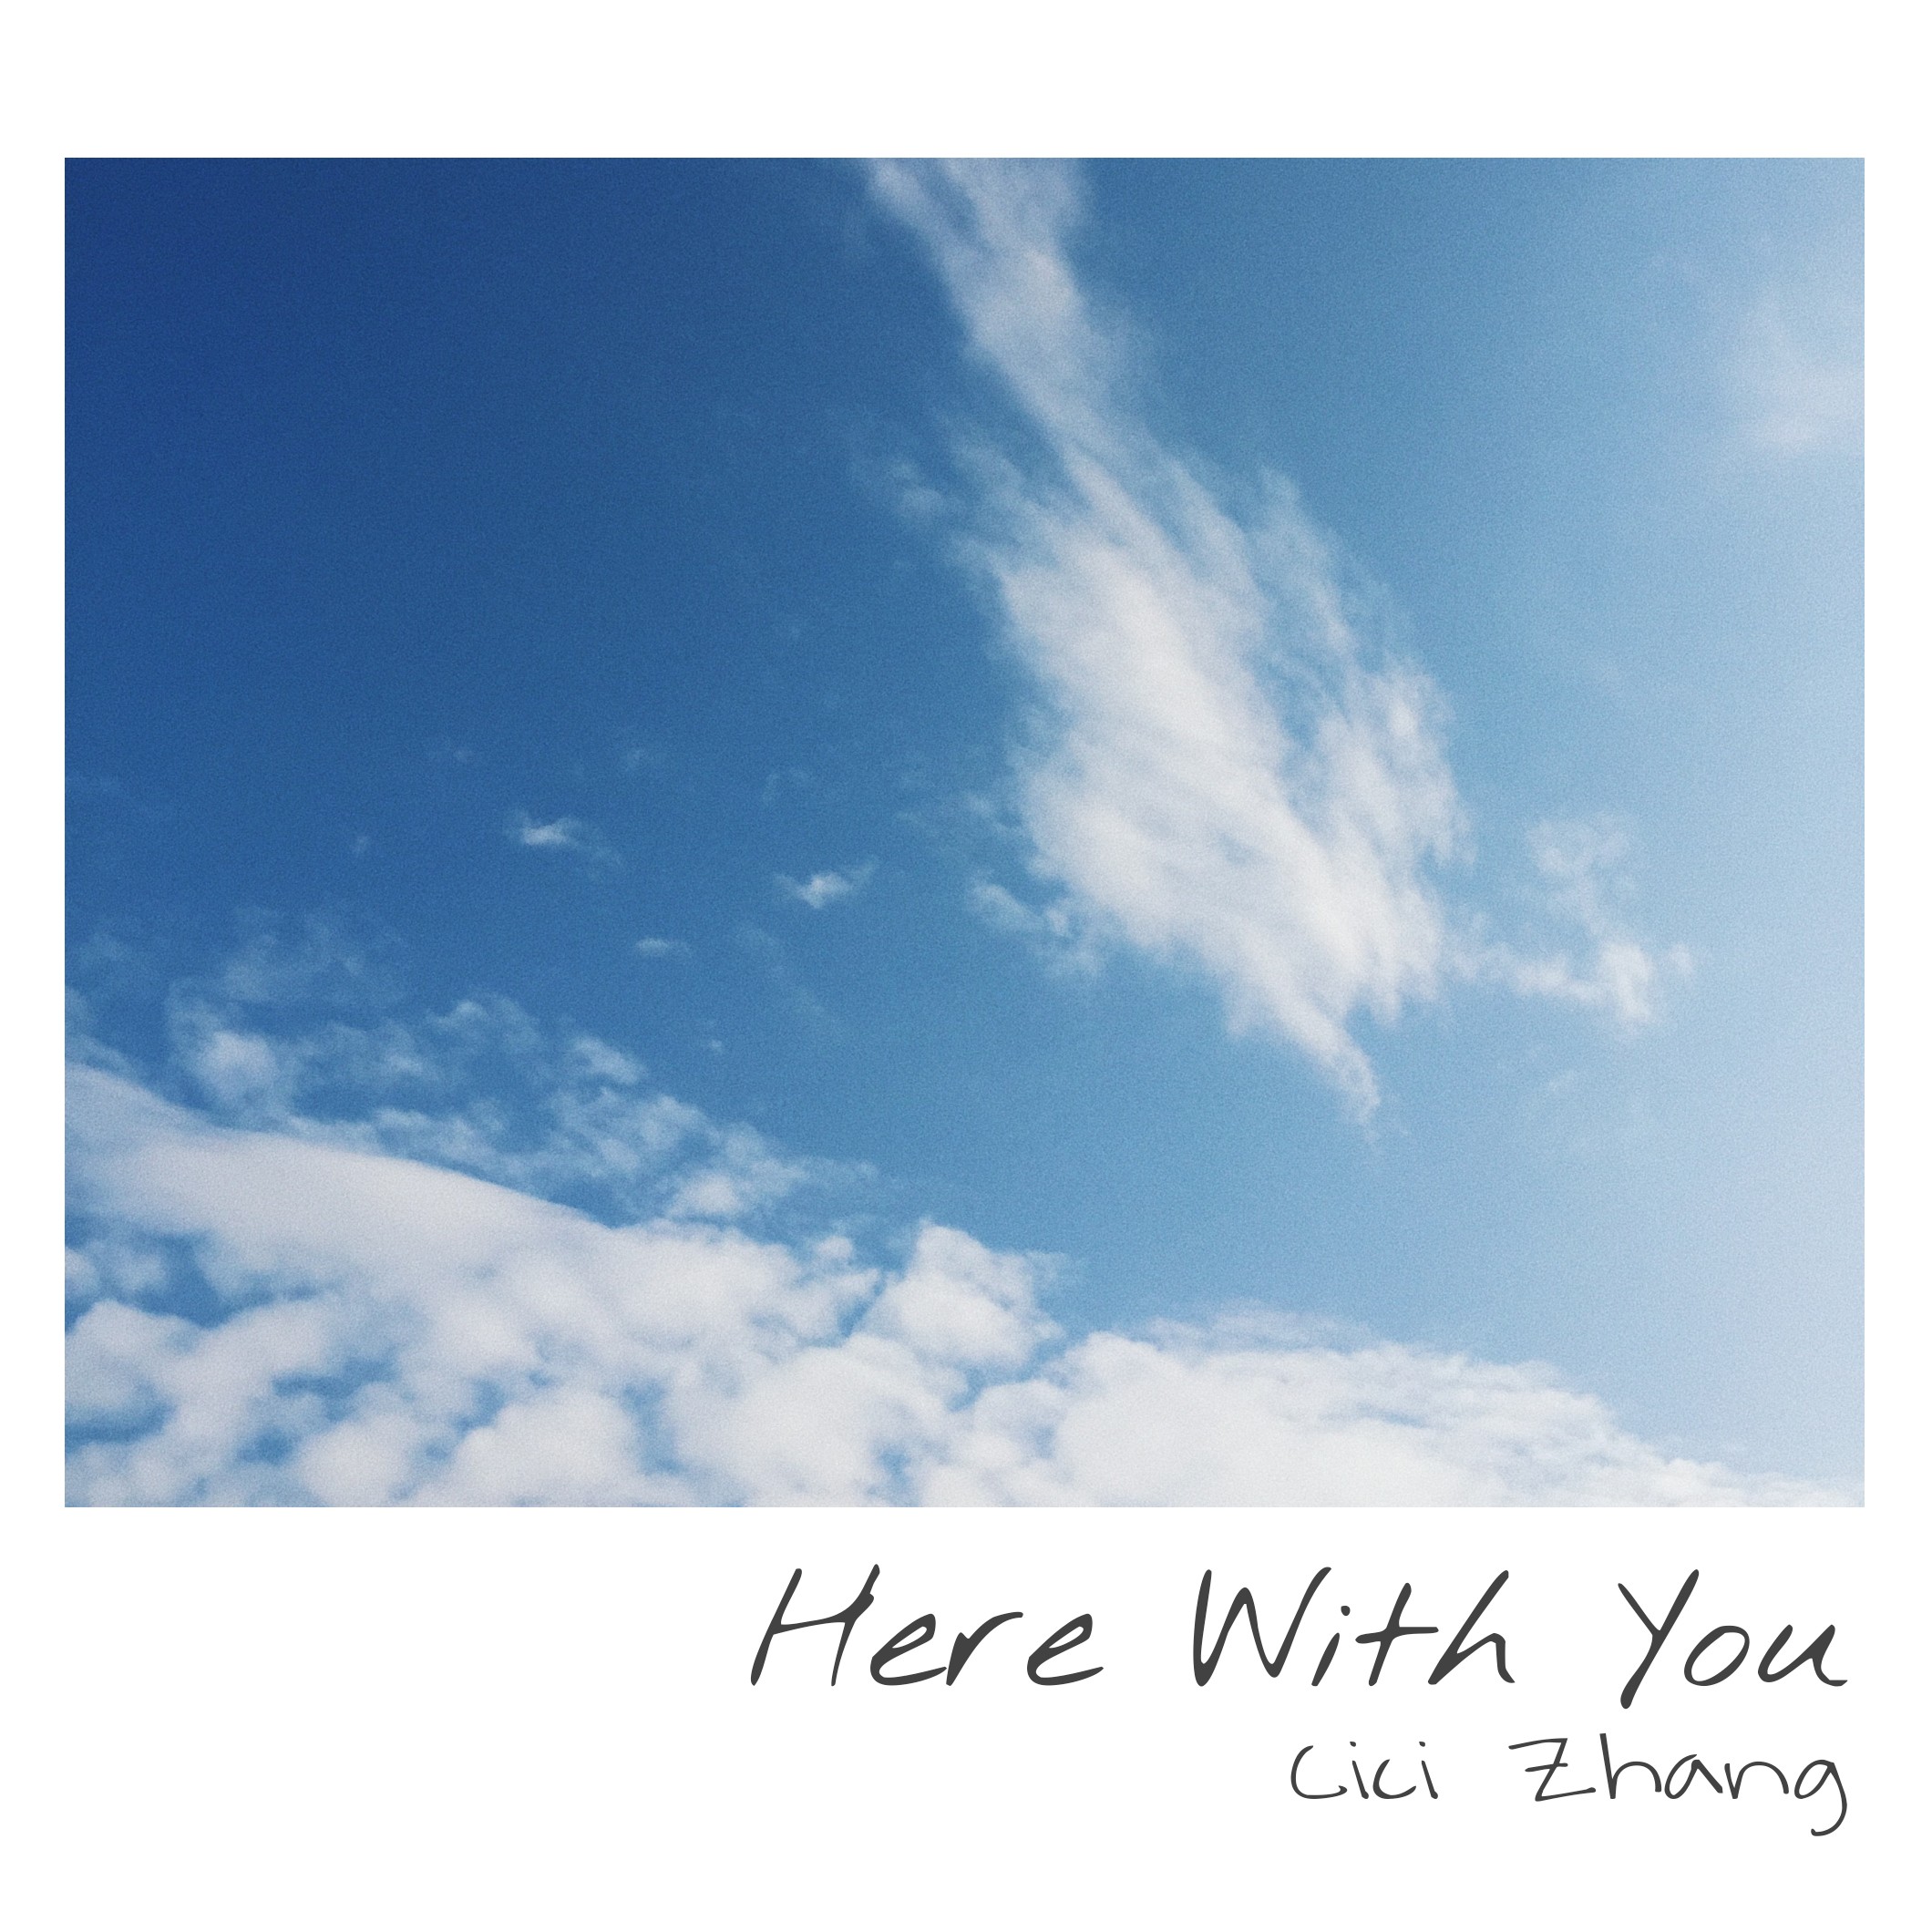 here with you